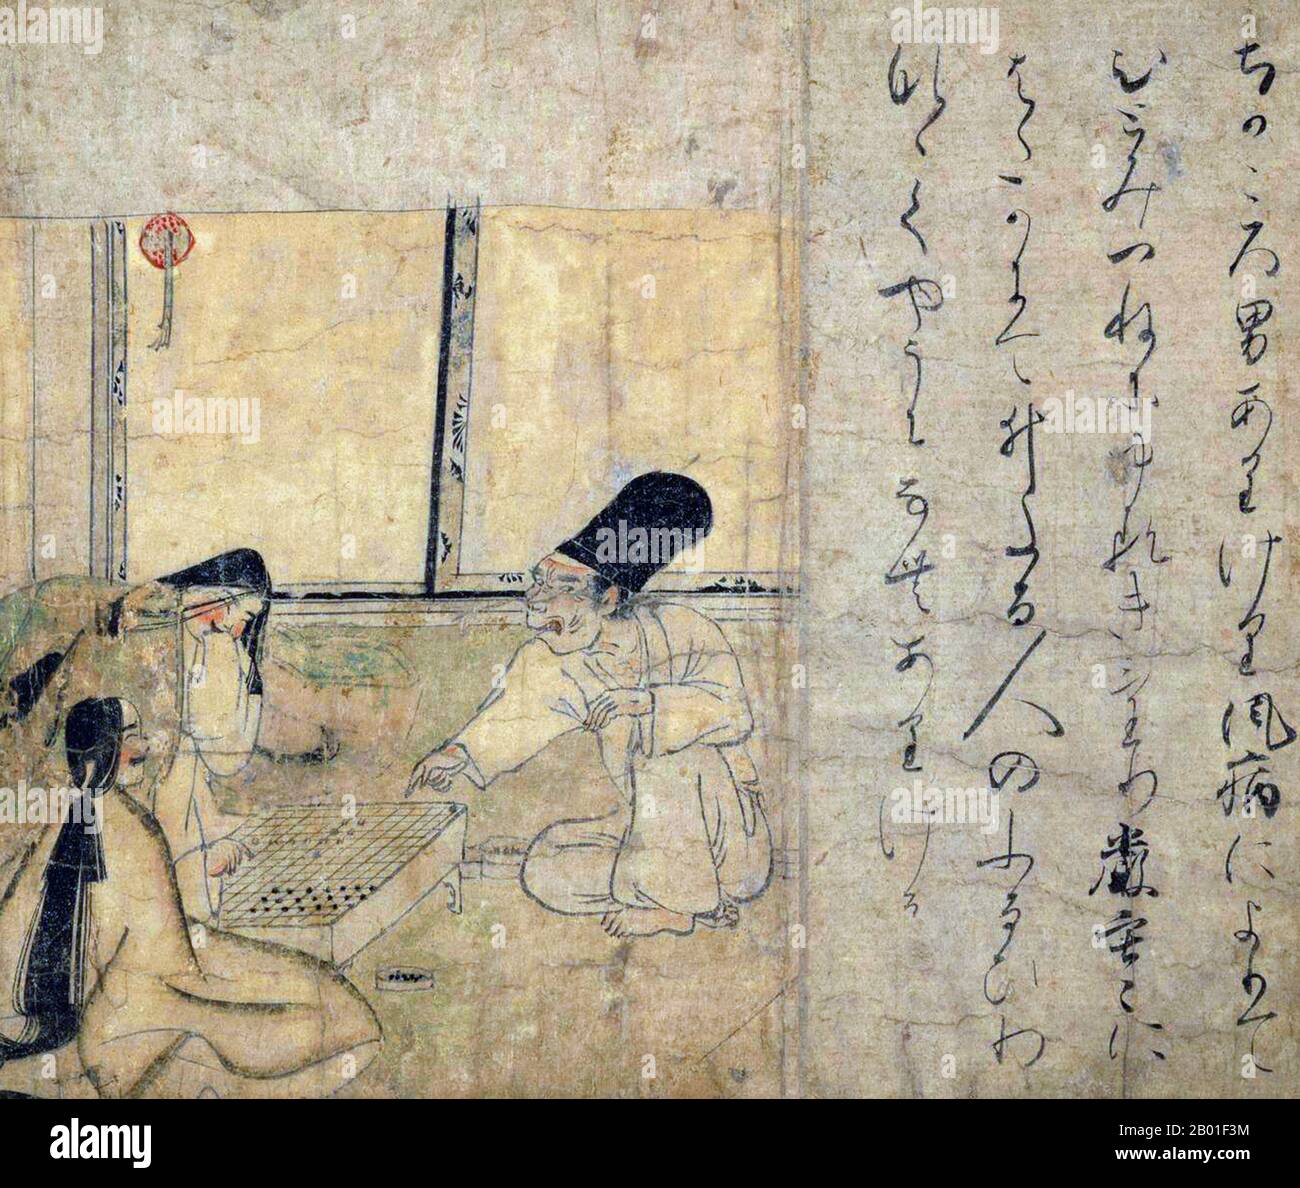 Japan: A man suffering from uvula disease (infection of the soft palate) playing a game of Go with a woman as another woman watches. Handscroll painting from the Yamai no Soshi (Yamai Zoshi) or 'diseases scroll', mid-12th century CE.  The Shihon choshoku yamai no soshi ('Diseases and Deformities', 紙本著色病草紙) is a late Heian (12th century) hand scroll (emakimono) consisting of colour paintings on paper that has, at some time, been cut into ten separate sections. They are preserved in the Kyoto National Museum and are listed as a National Treasure of Japan. Stock Photo